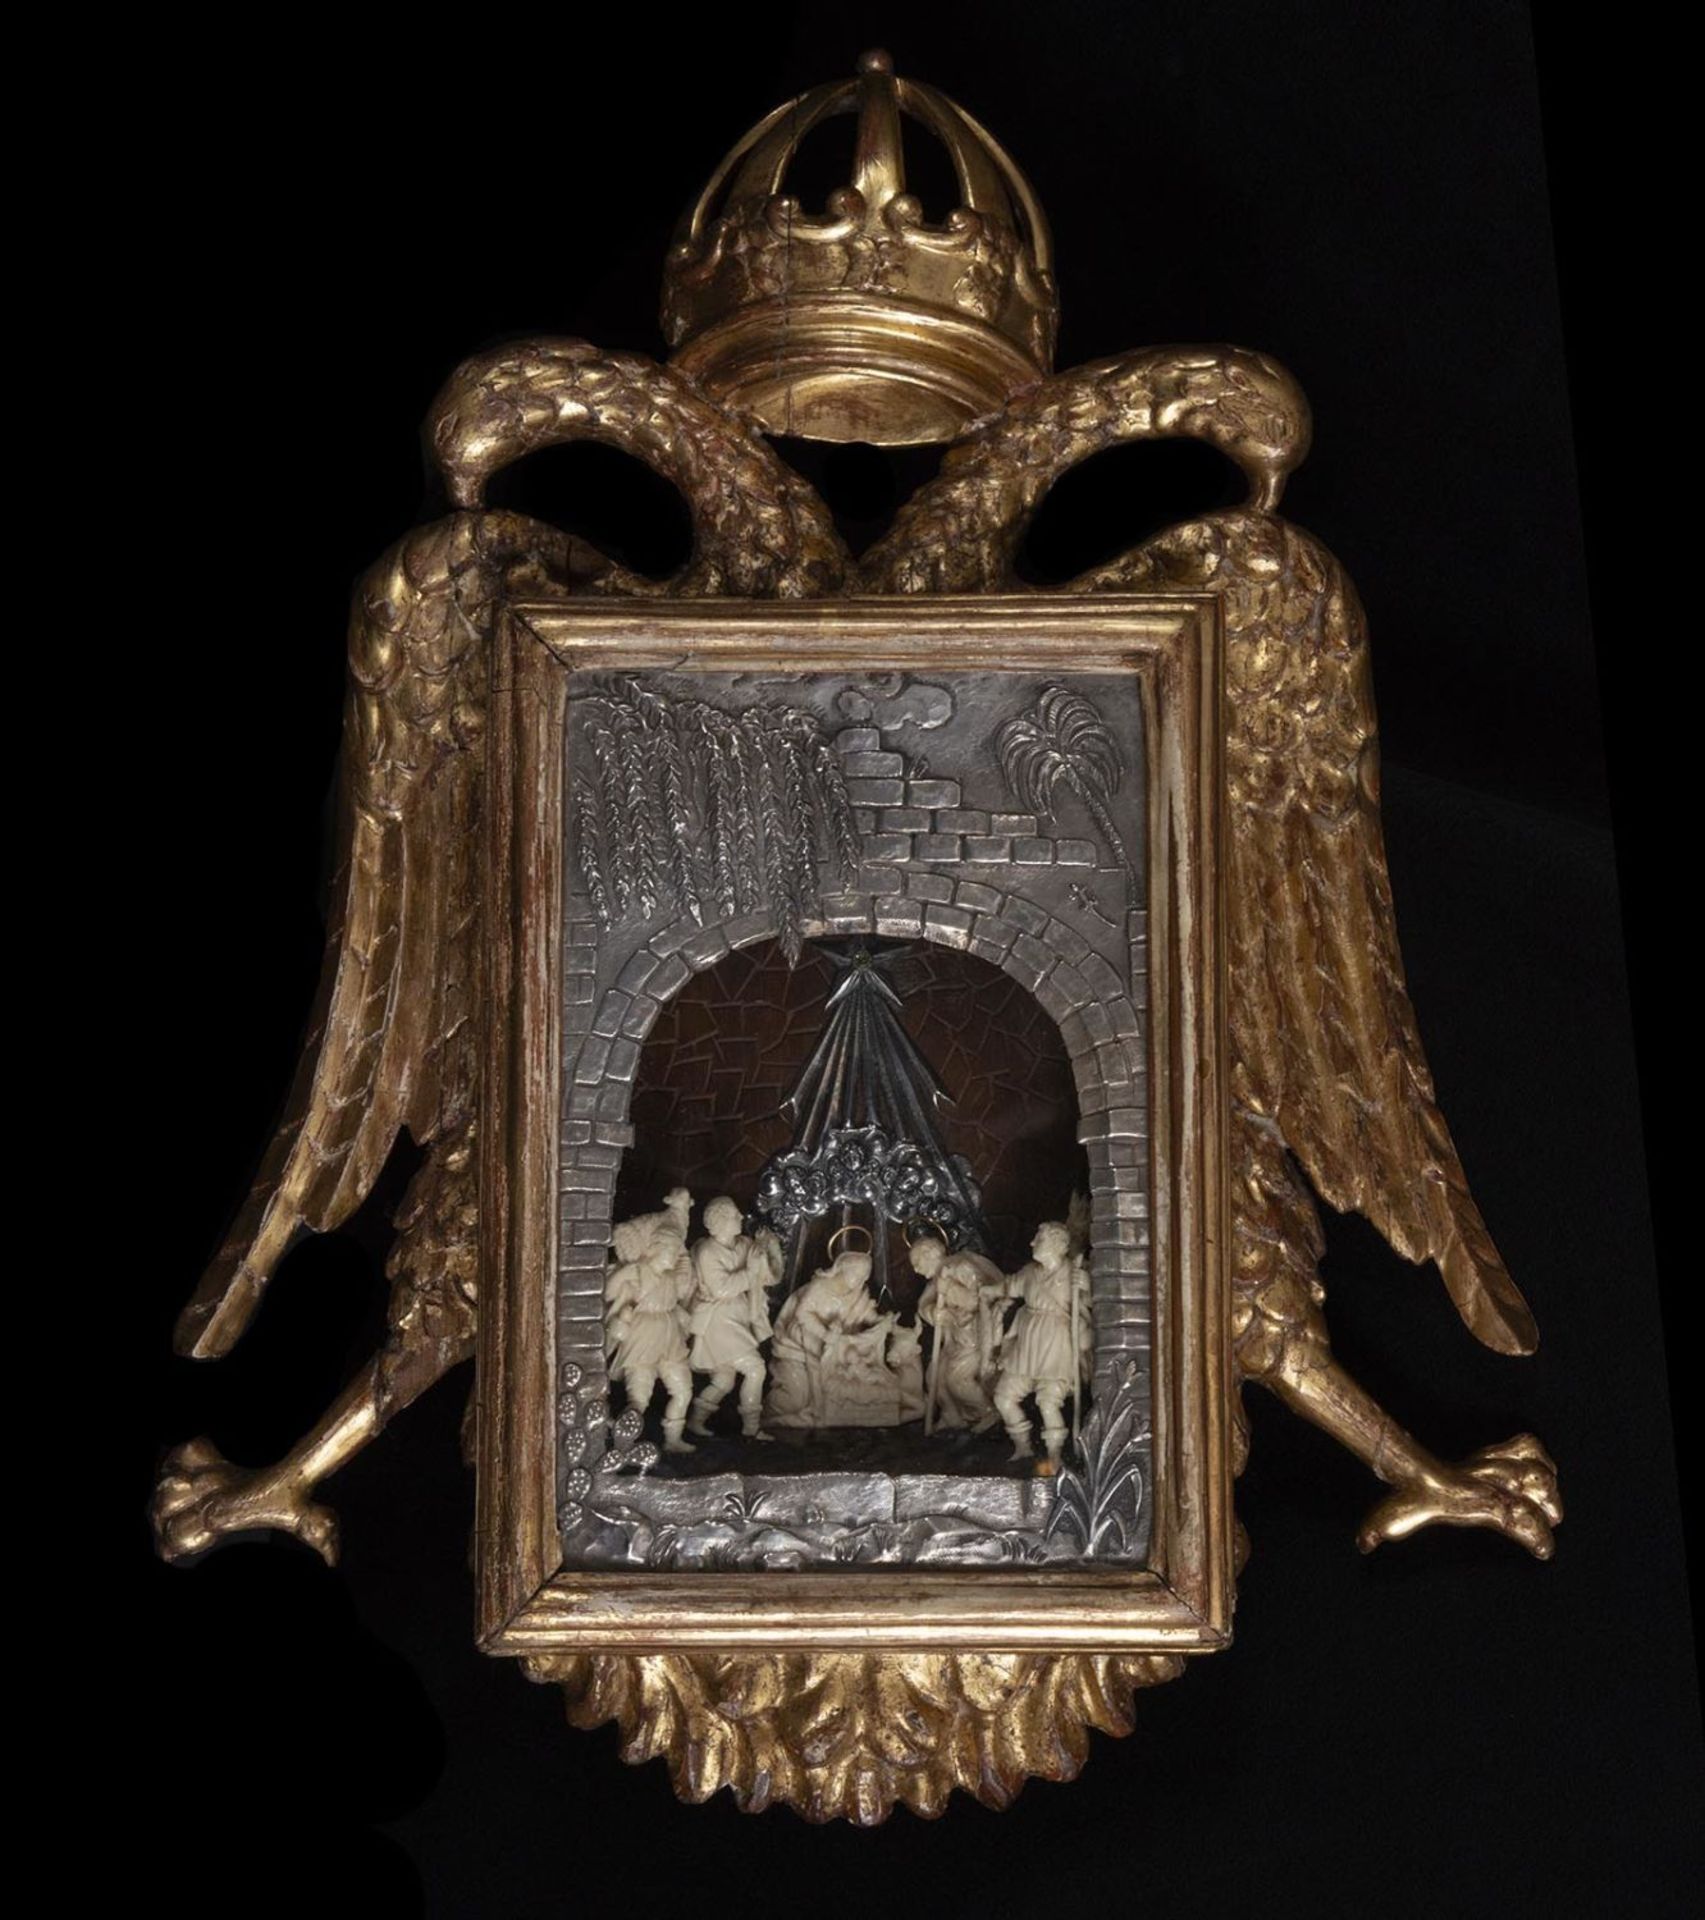 Magnificent Trapani Nativity Scene in silver and ivory from the 18th century, with an original frame